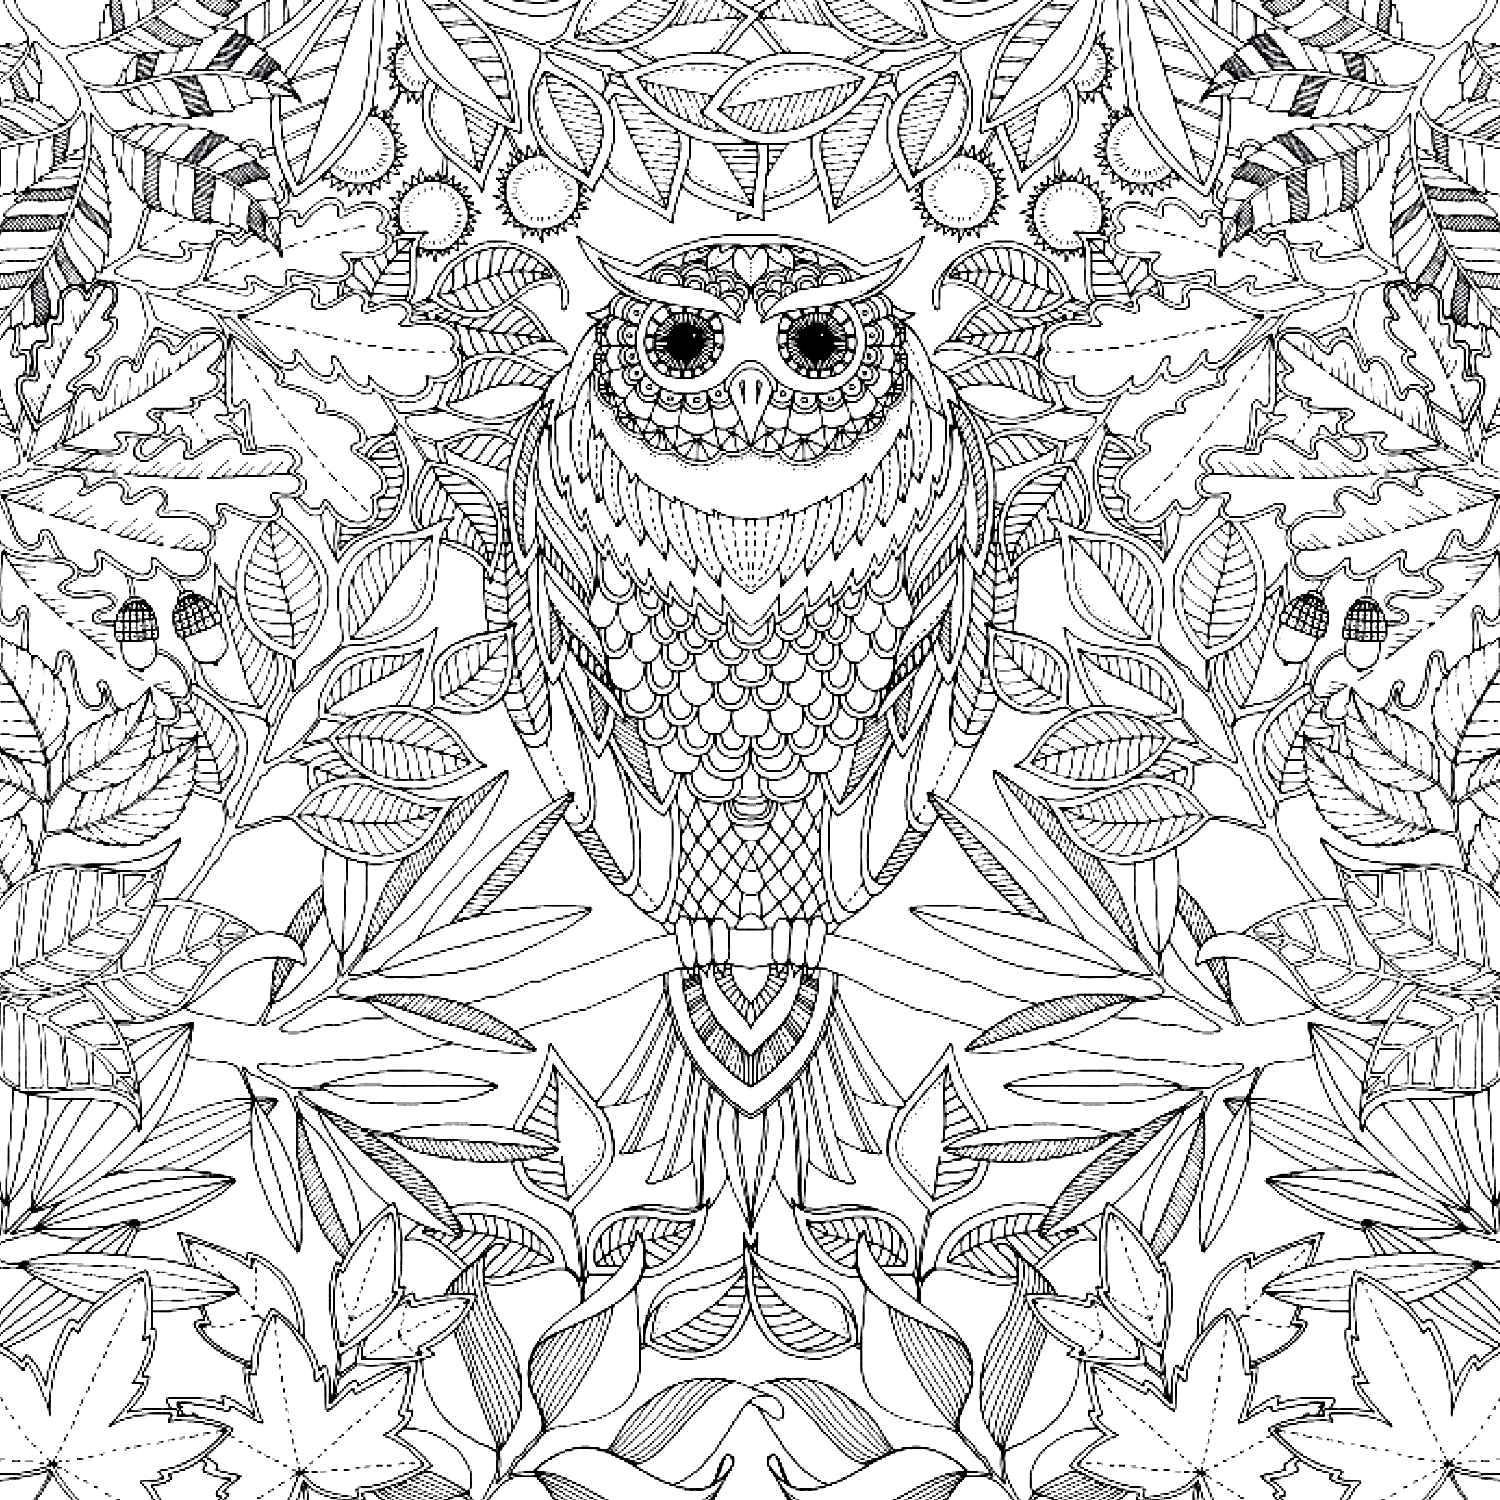 Art Therapy #23089 (Relaxation) - Printable coloring pages